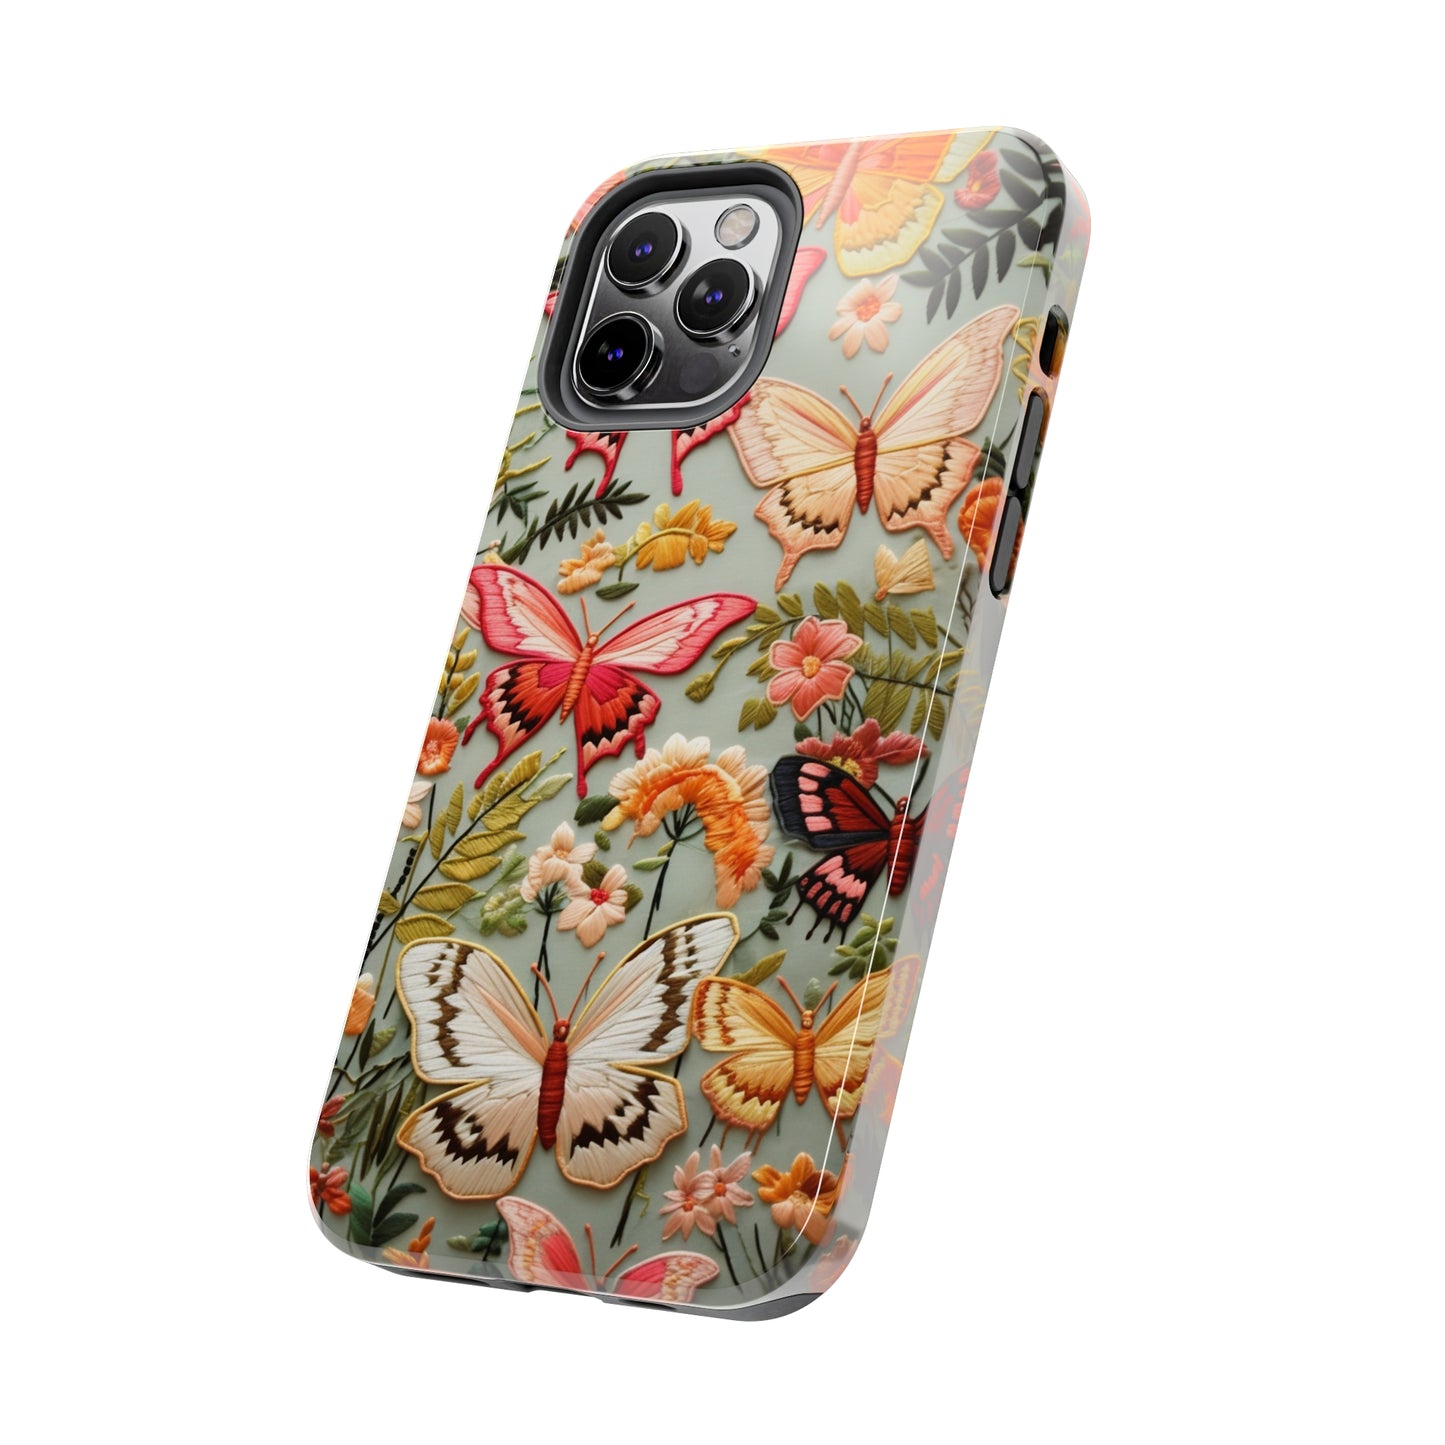 iPhone 12 and 13 case with artisanal butterfly designs